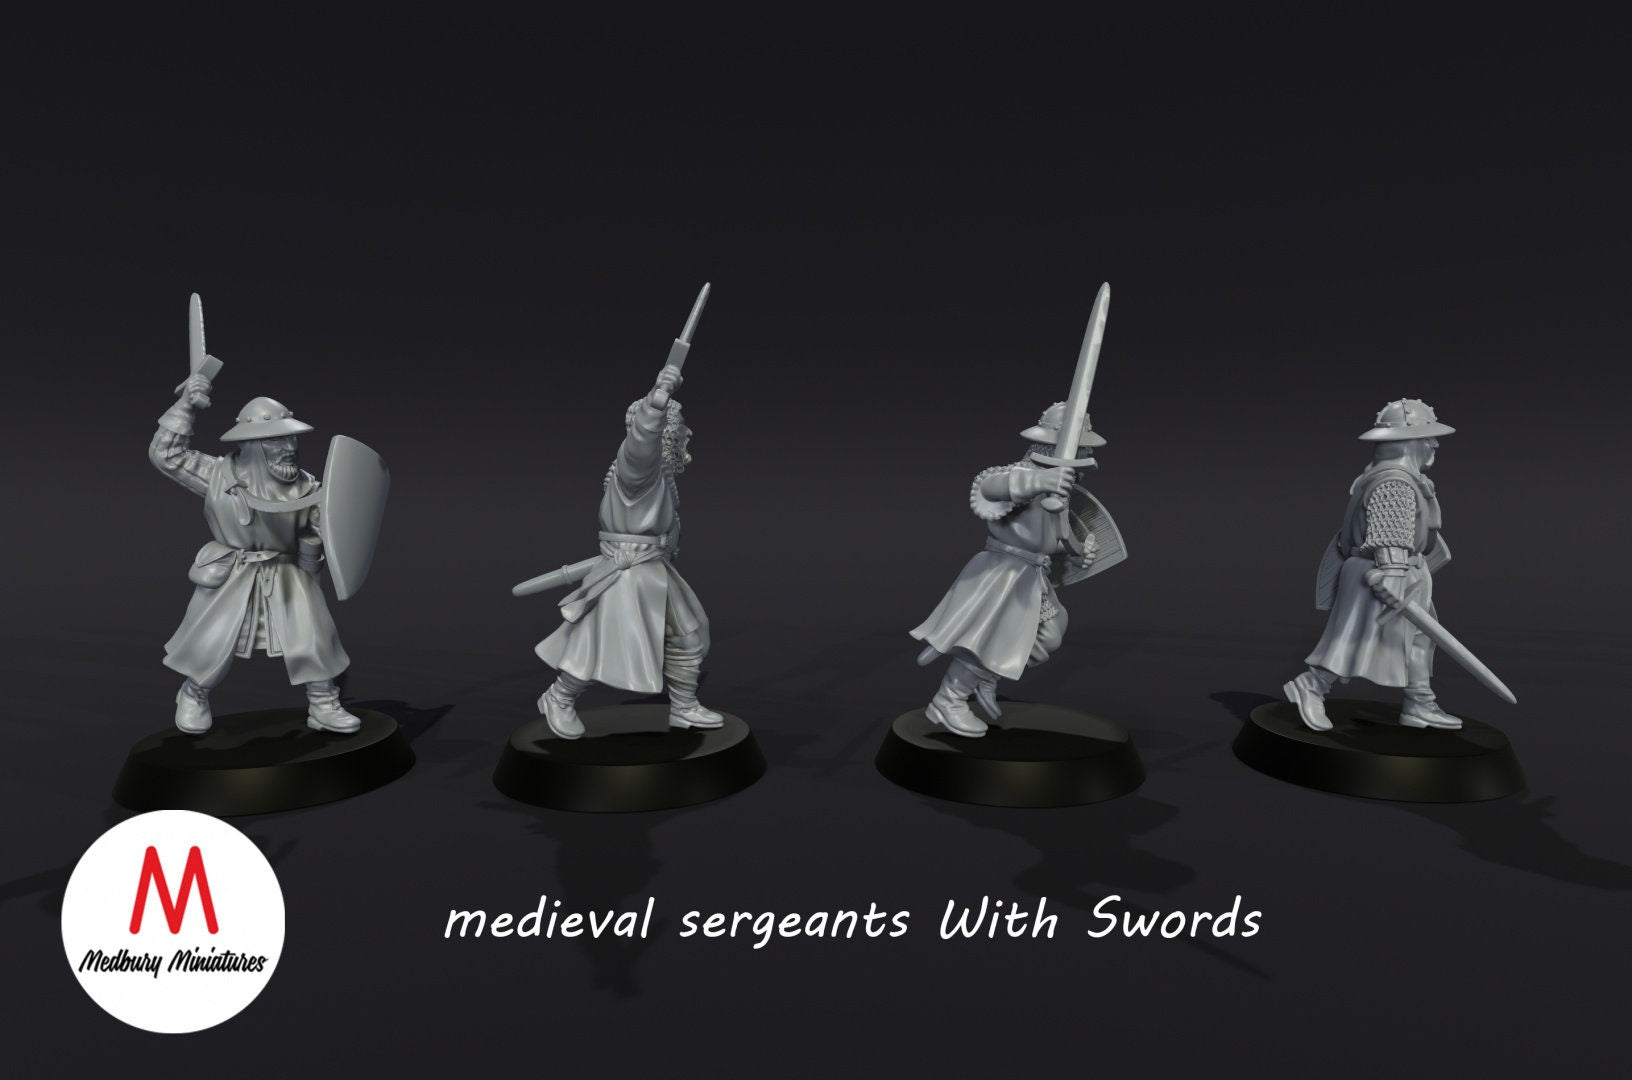 Medieval Sergeants with Swords